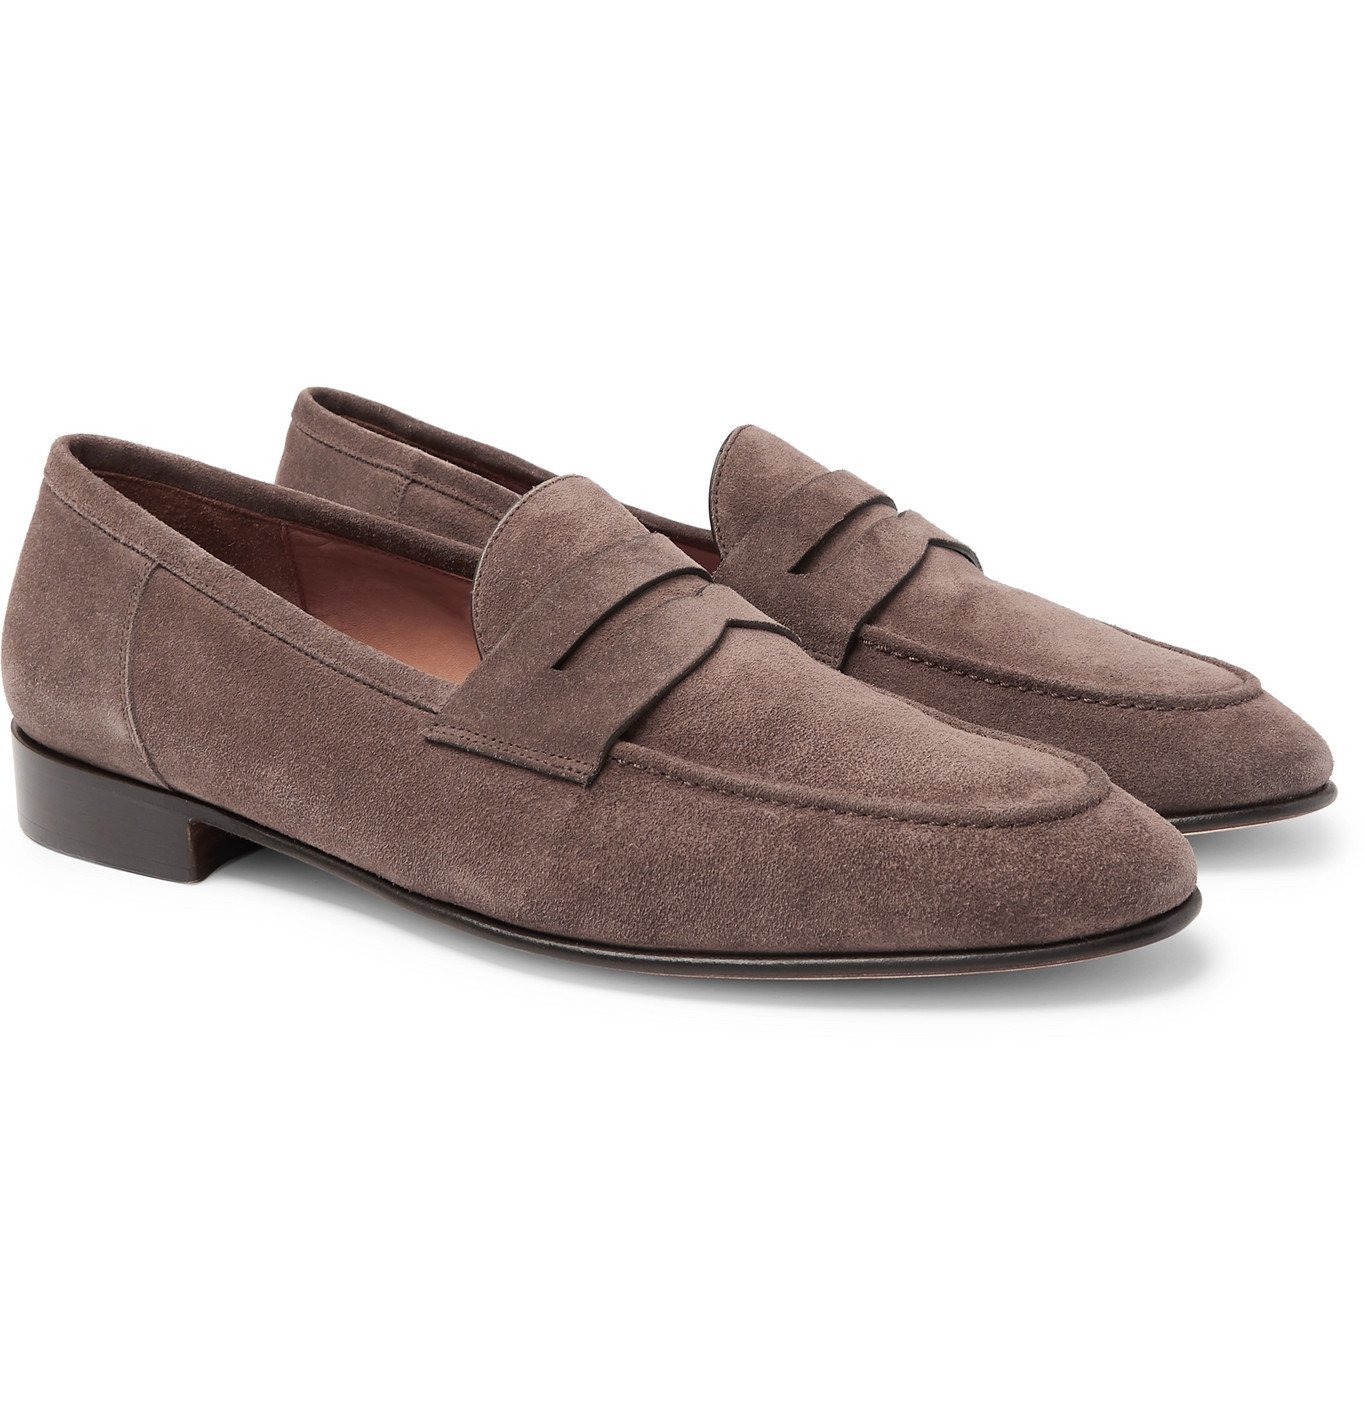 Ralph Lauren Purple Label - Chessing Suede Penny Loafers - Brown Ralph ...